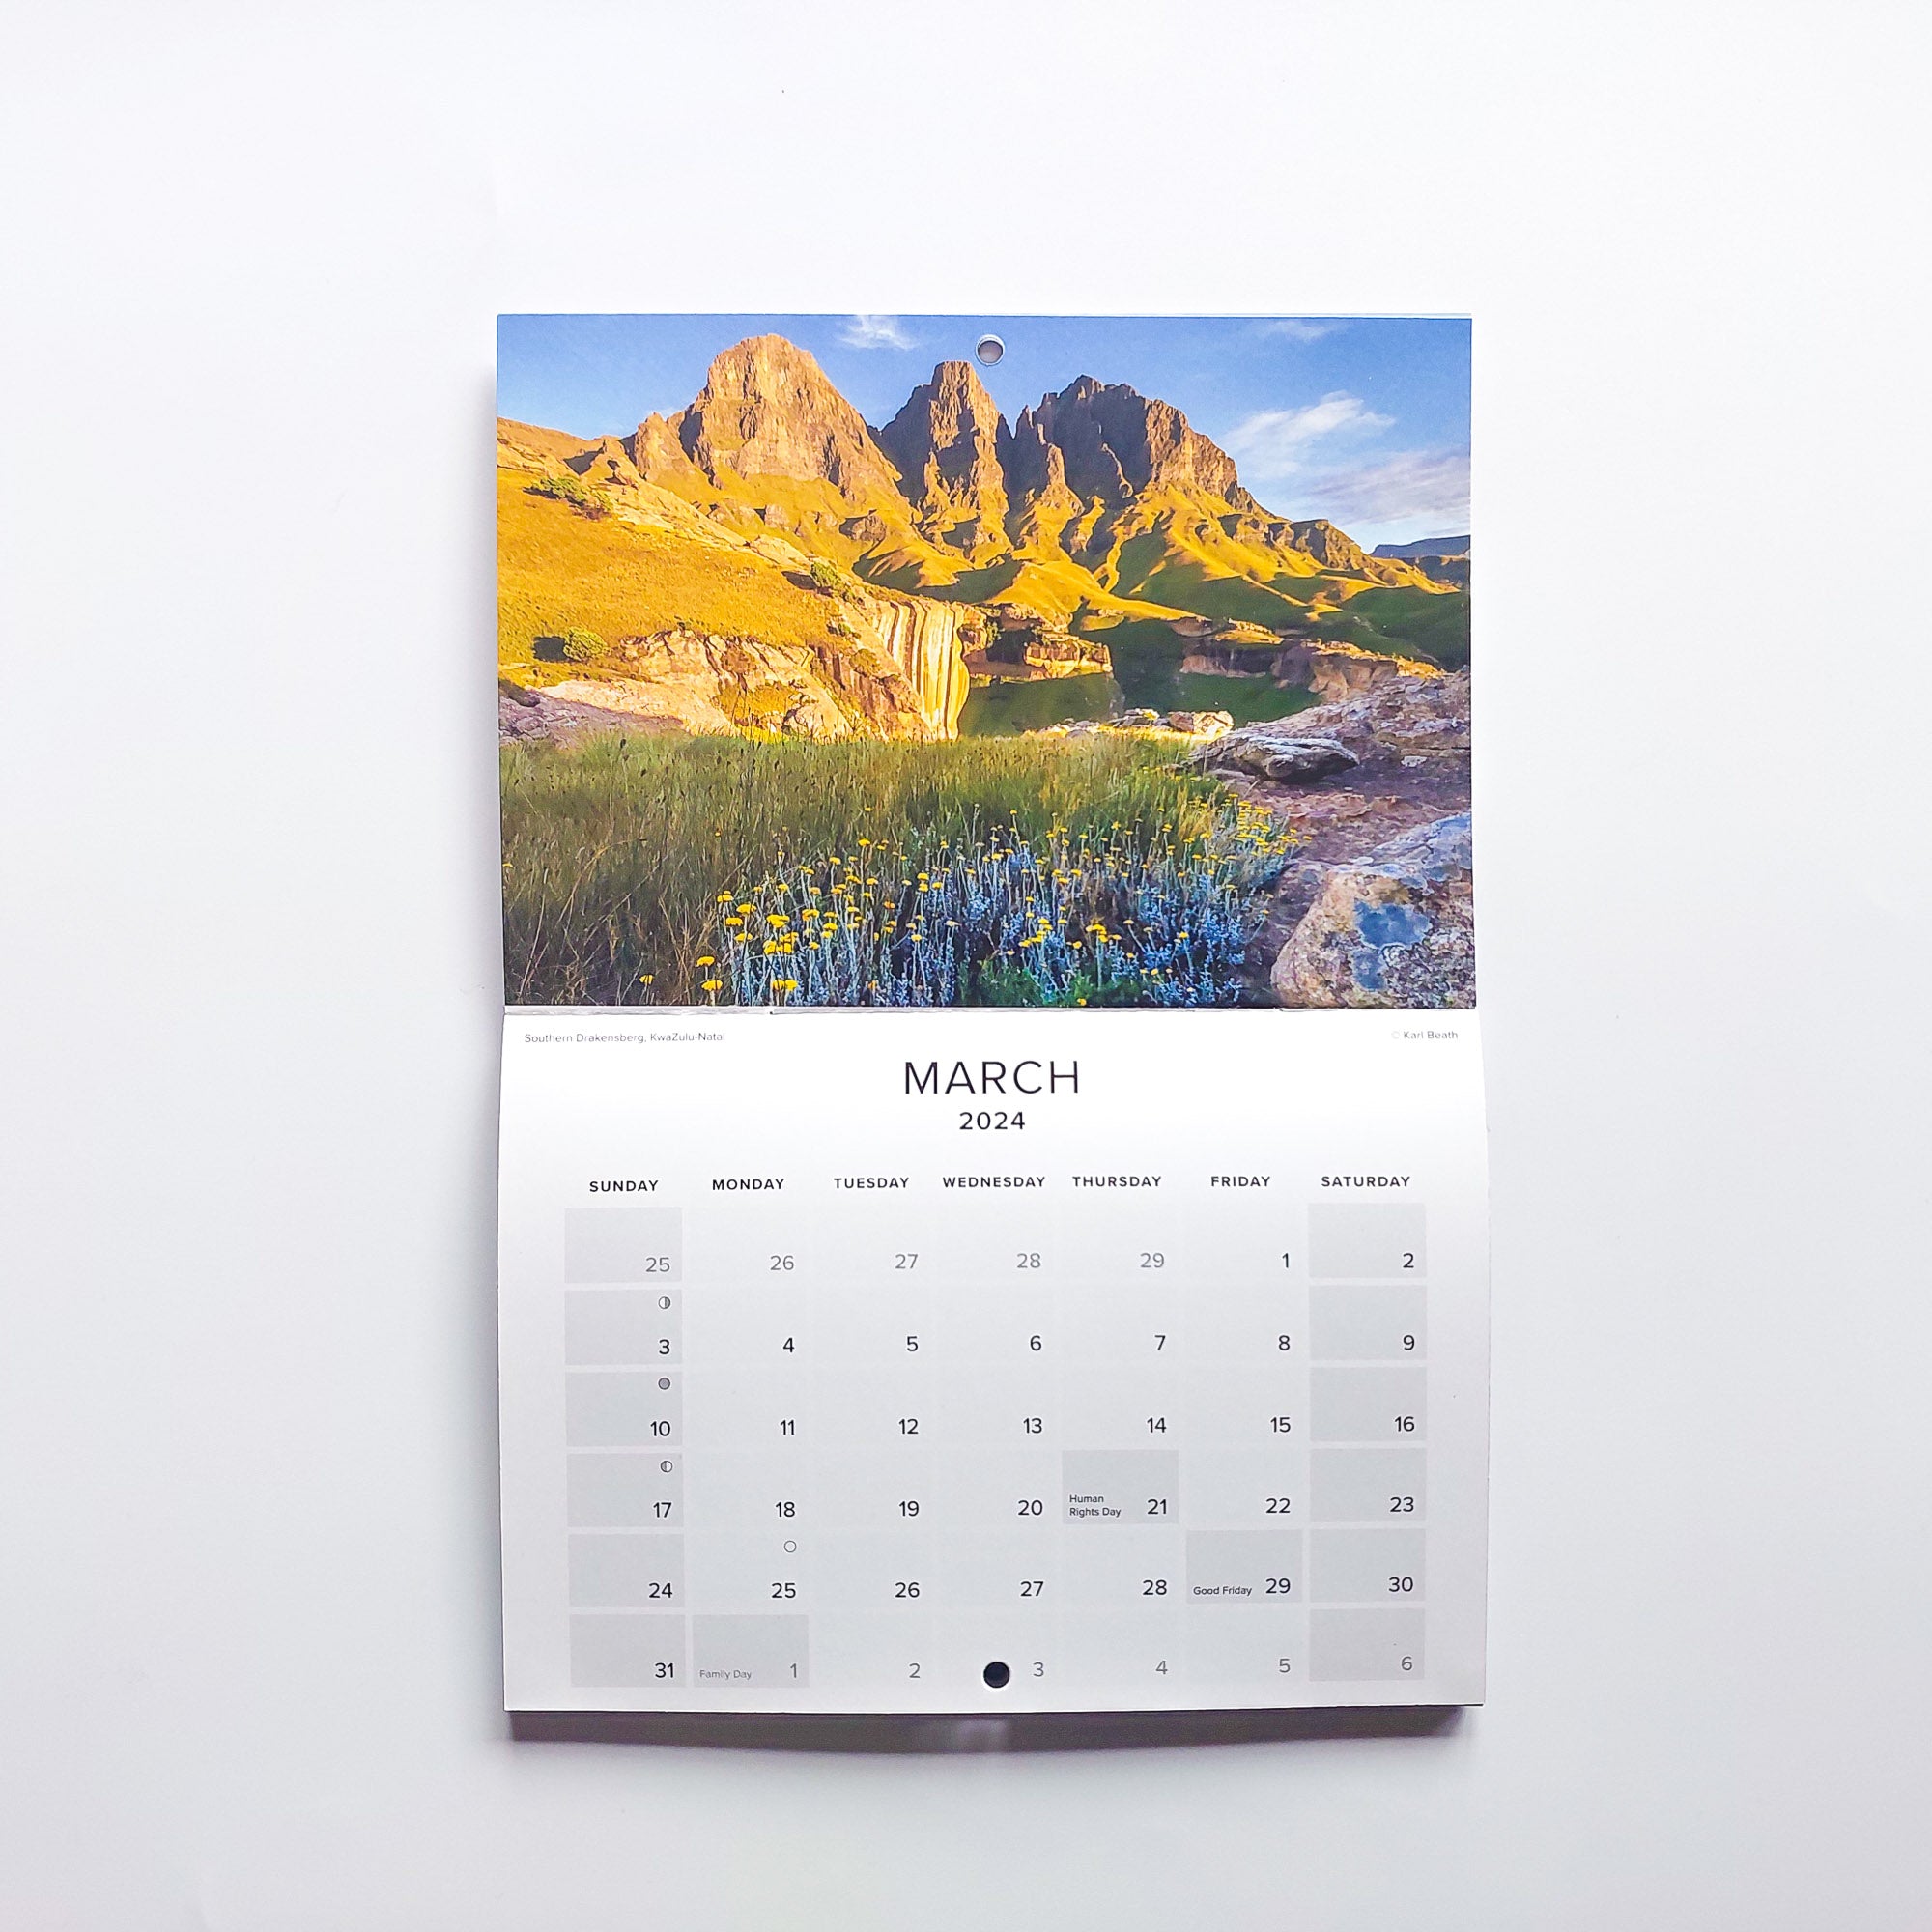 2024 South Africa Landscapes Calendar - Small